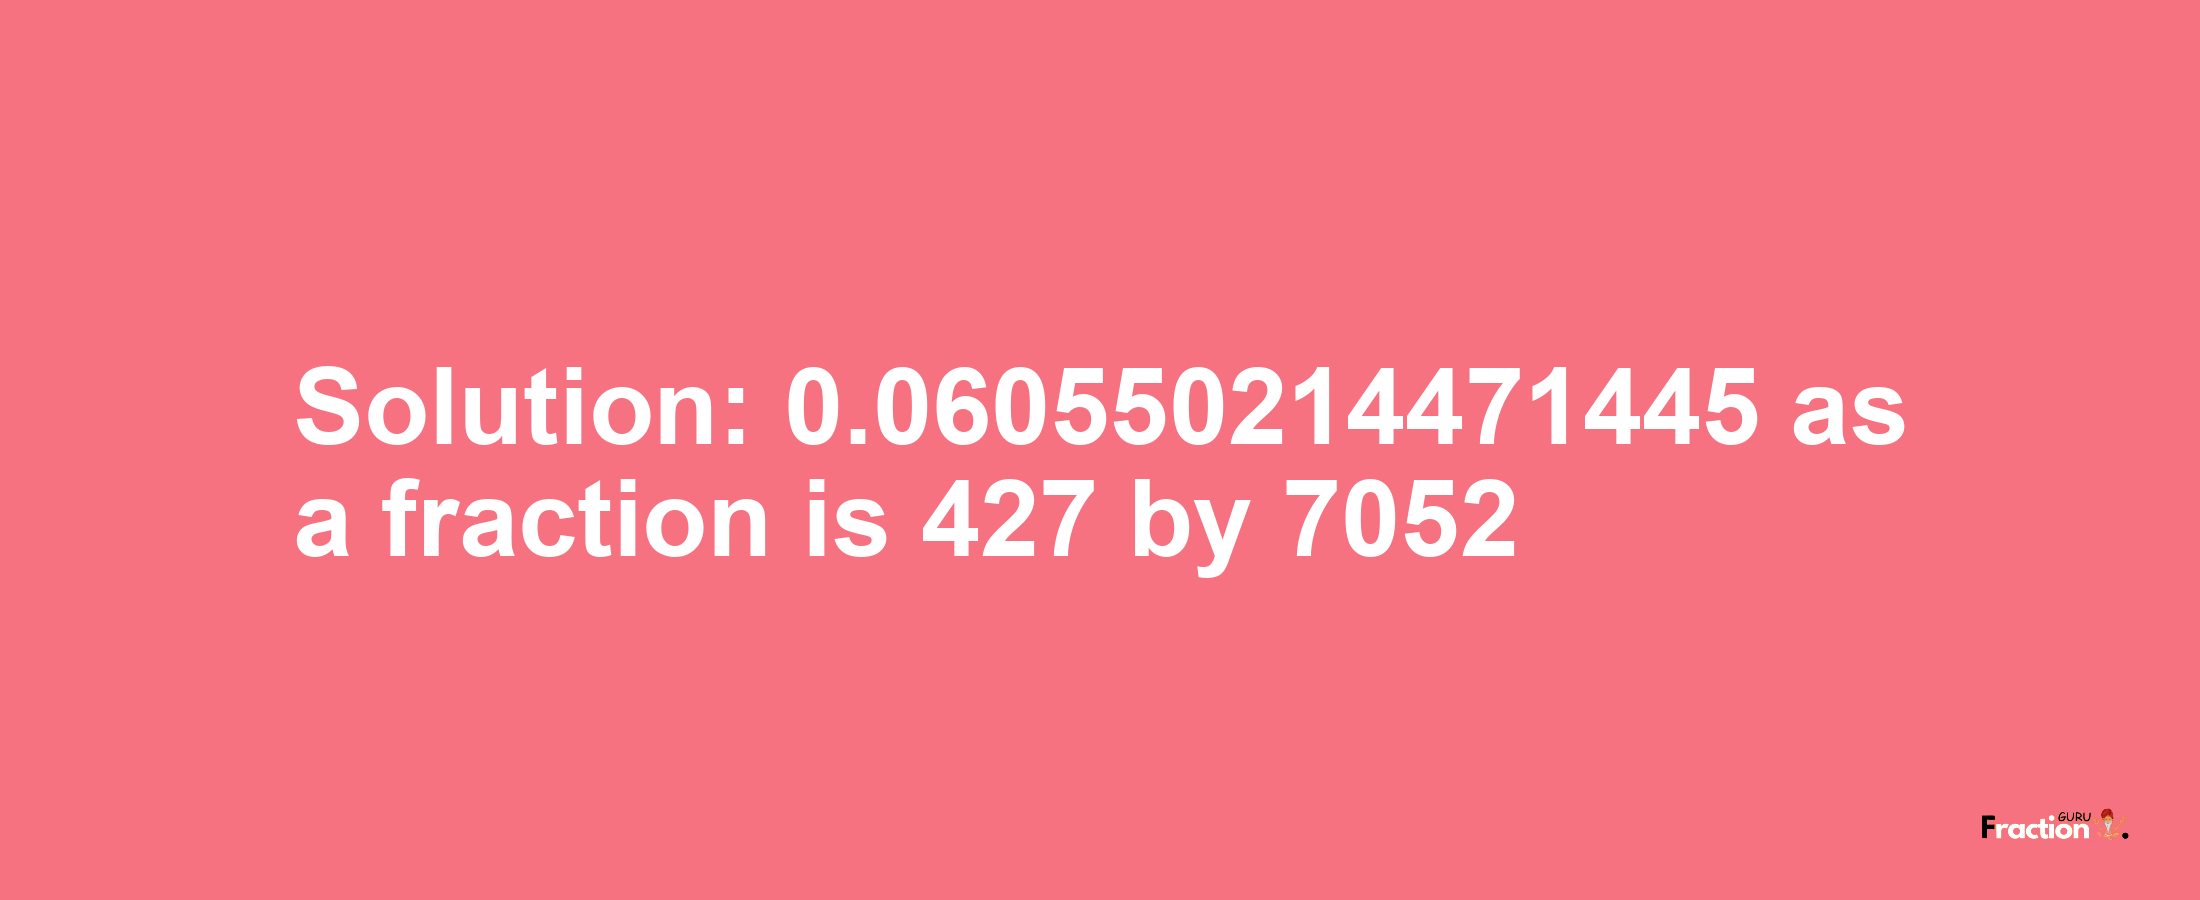 Solution:0.060550214471445 as a fraction is 427/7052